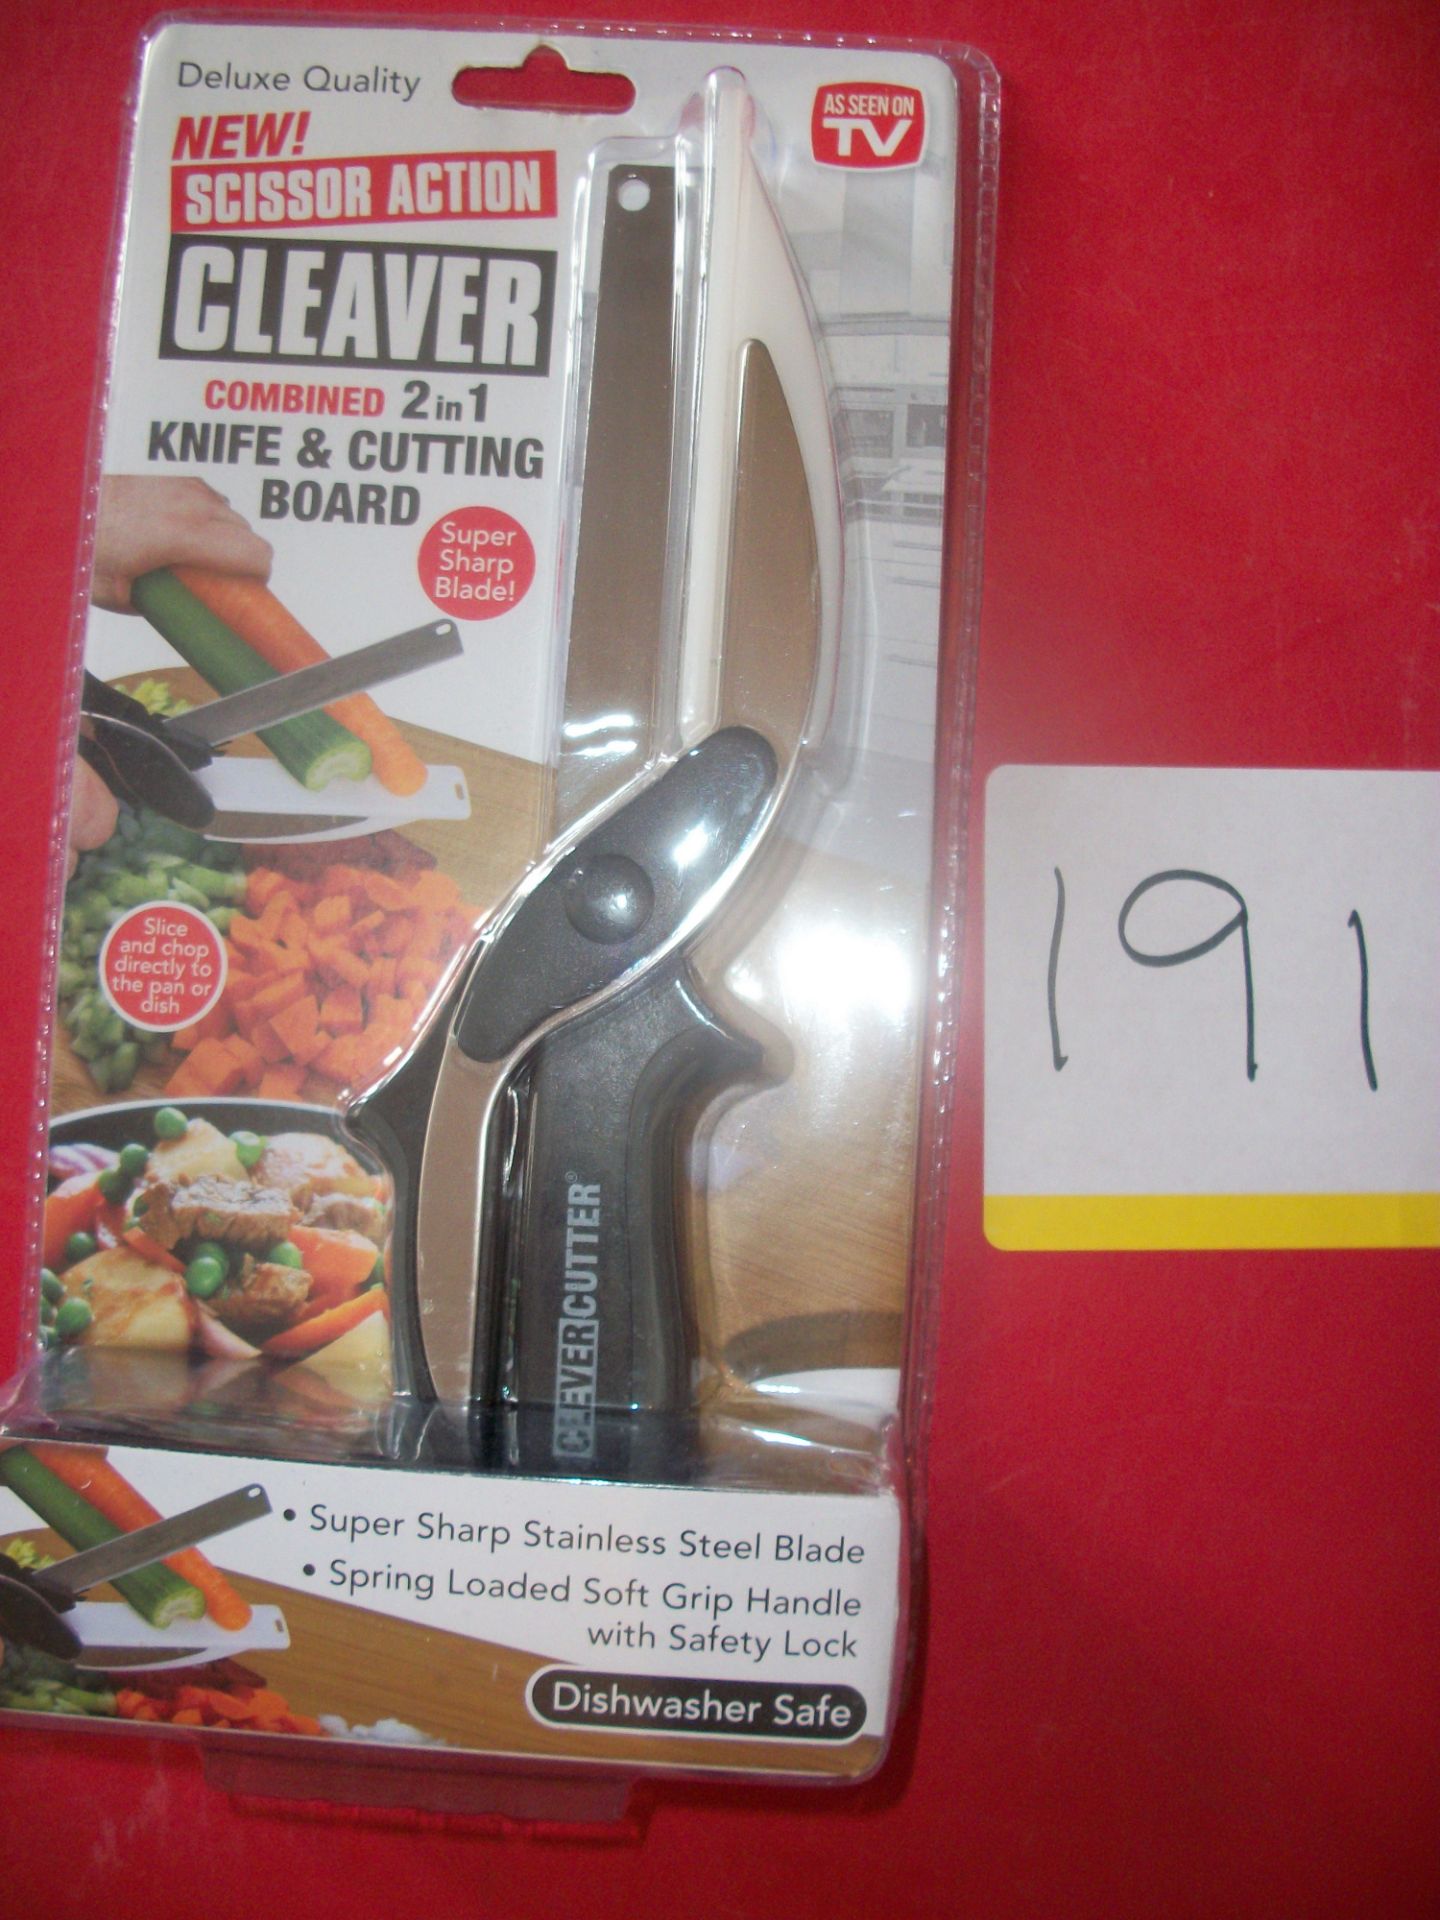 10 x Scissor Action Cleaver Combined 2in1 Knife & Cutting Board